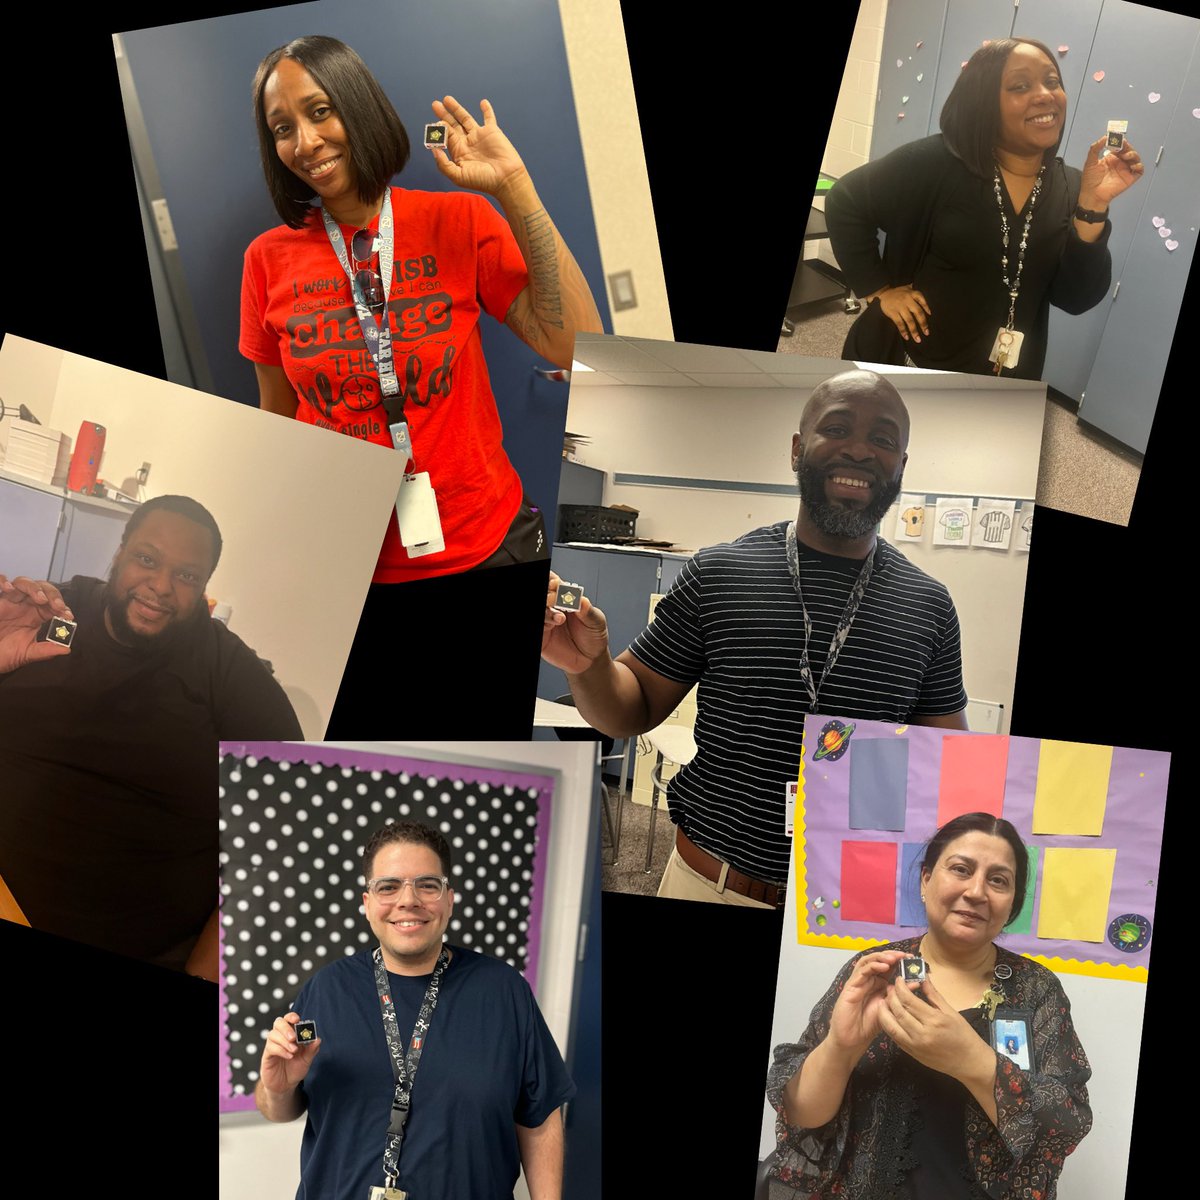 Congratulations to our @SISBPatriots staff members who received their 5 or 10 year pins. We appreciate your service to our students.